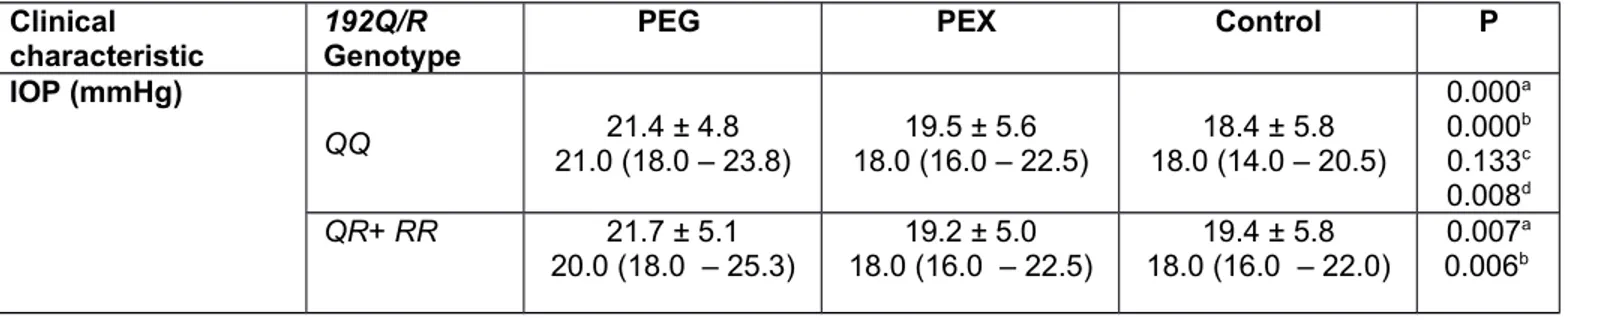 Table 6. Stratification of visual clinical characteristics of PEG, PEX and control groups with respect to PON1 192Q/R genotypes  Clinical 